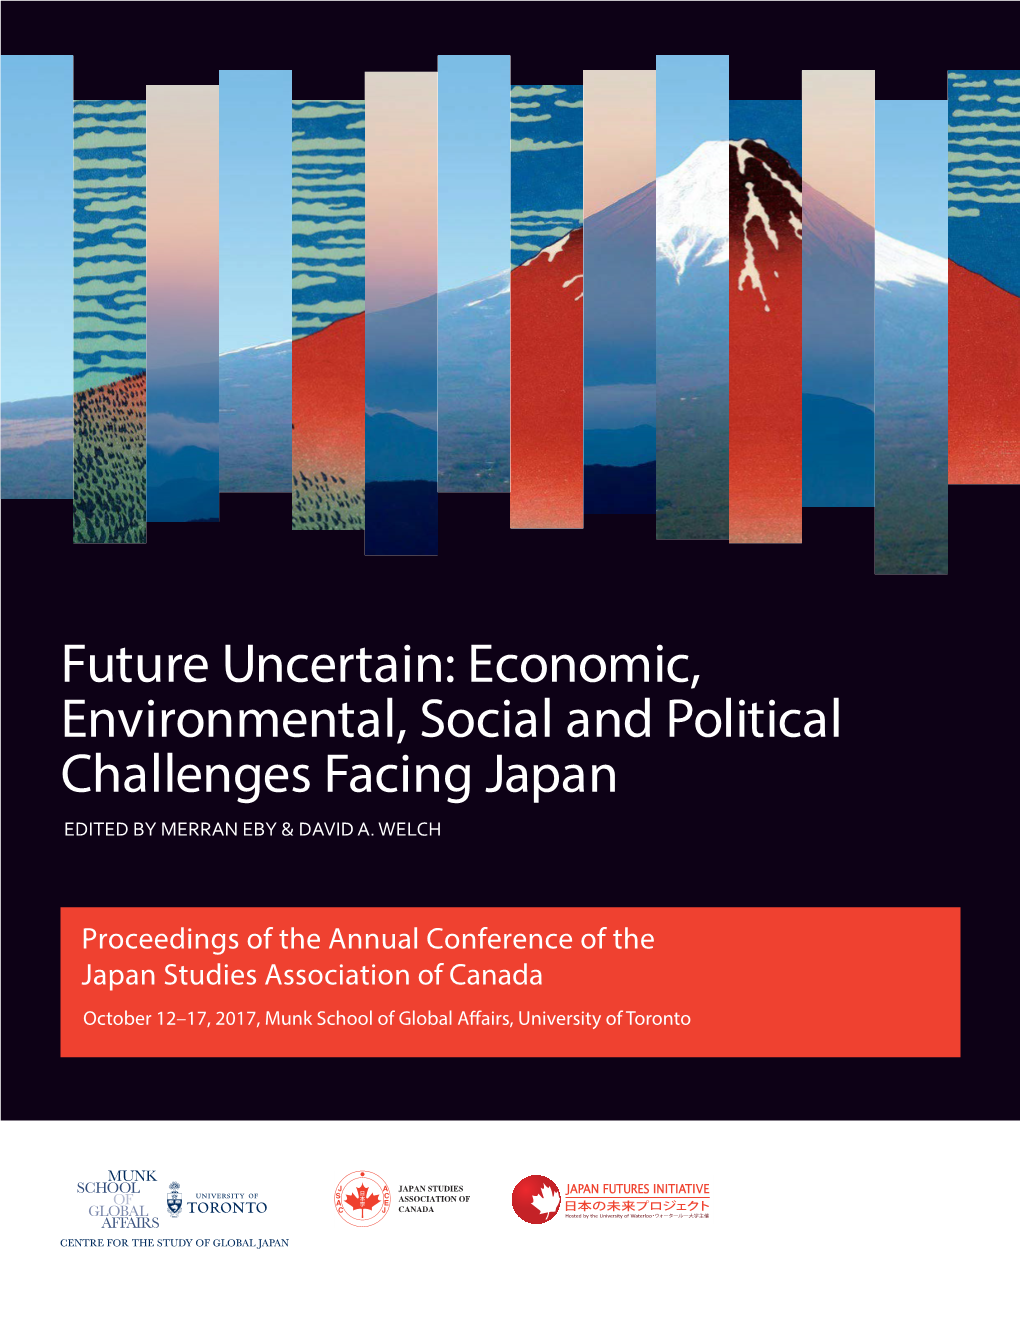 Future Uncertain: Economic, Environmental, Social and Political Challenges Facing Japan EDITED by MERRAN EBY & DAVID A